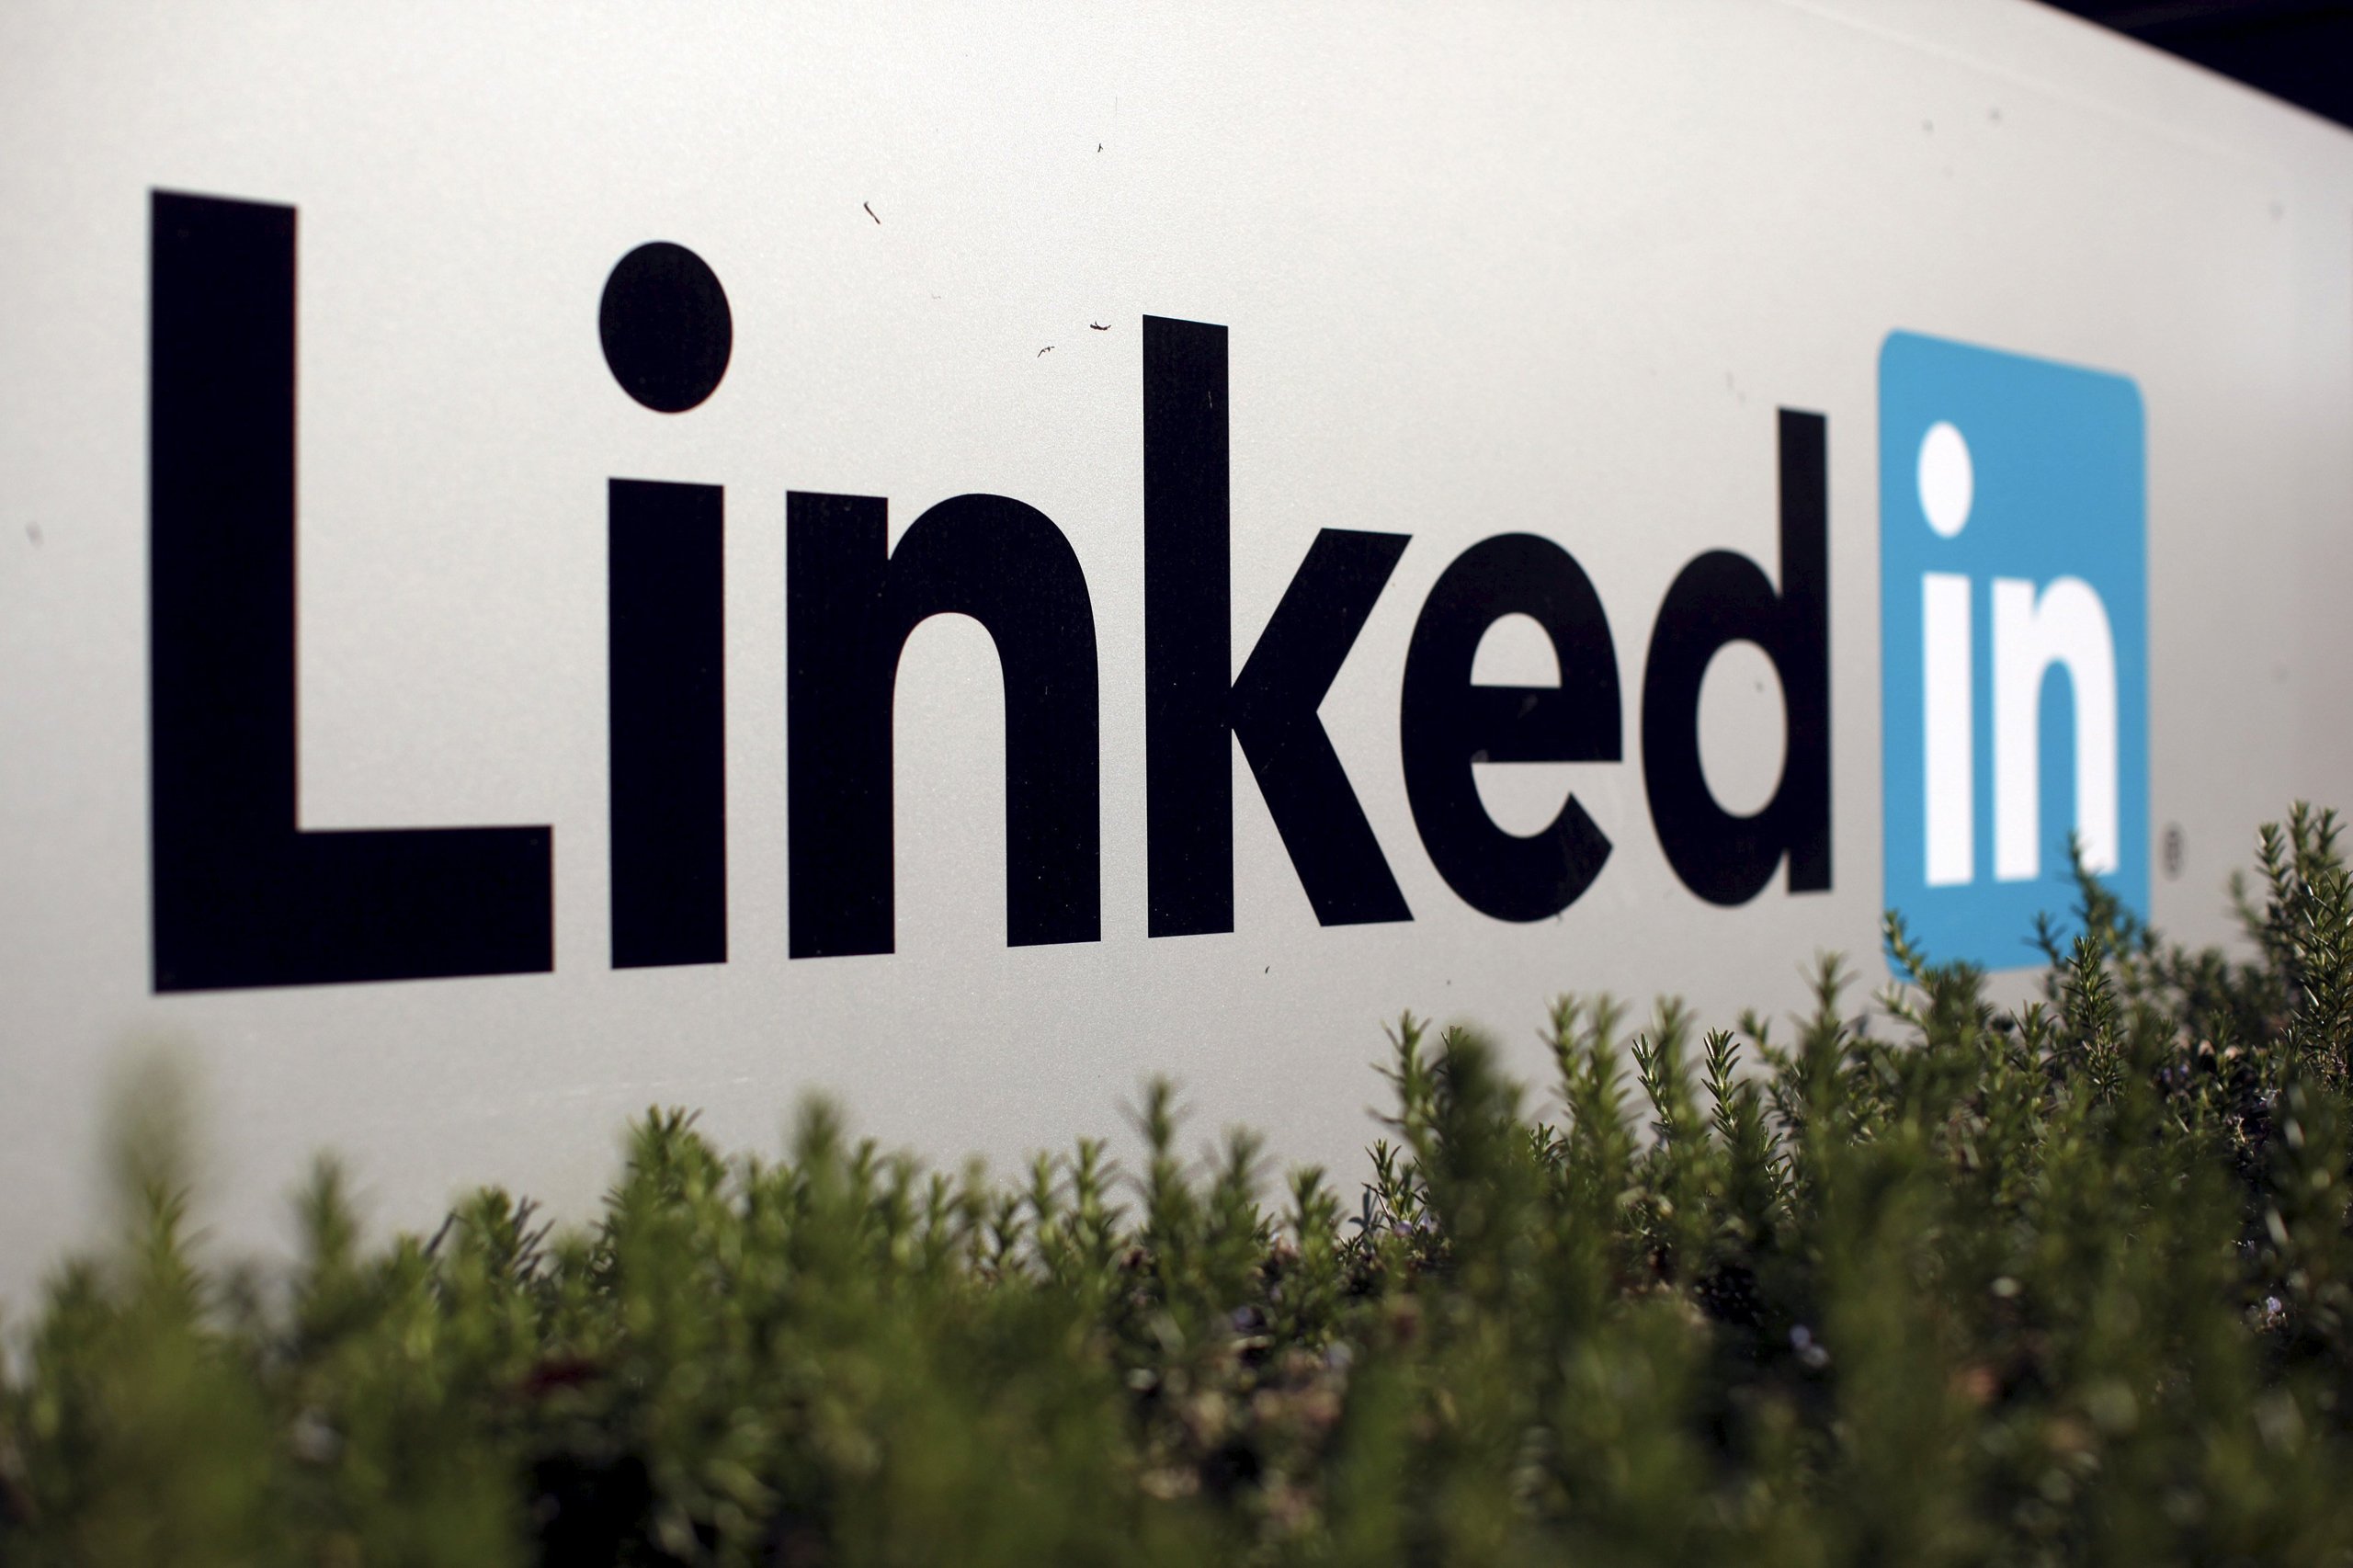 The logo for LinkedIn Corporation is shown in Mountain View, California